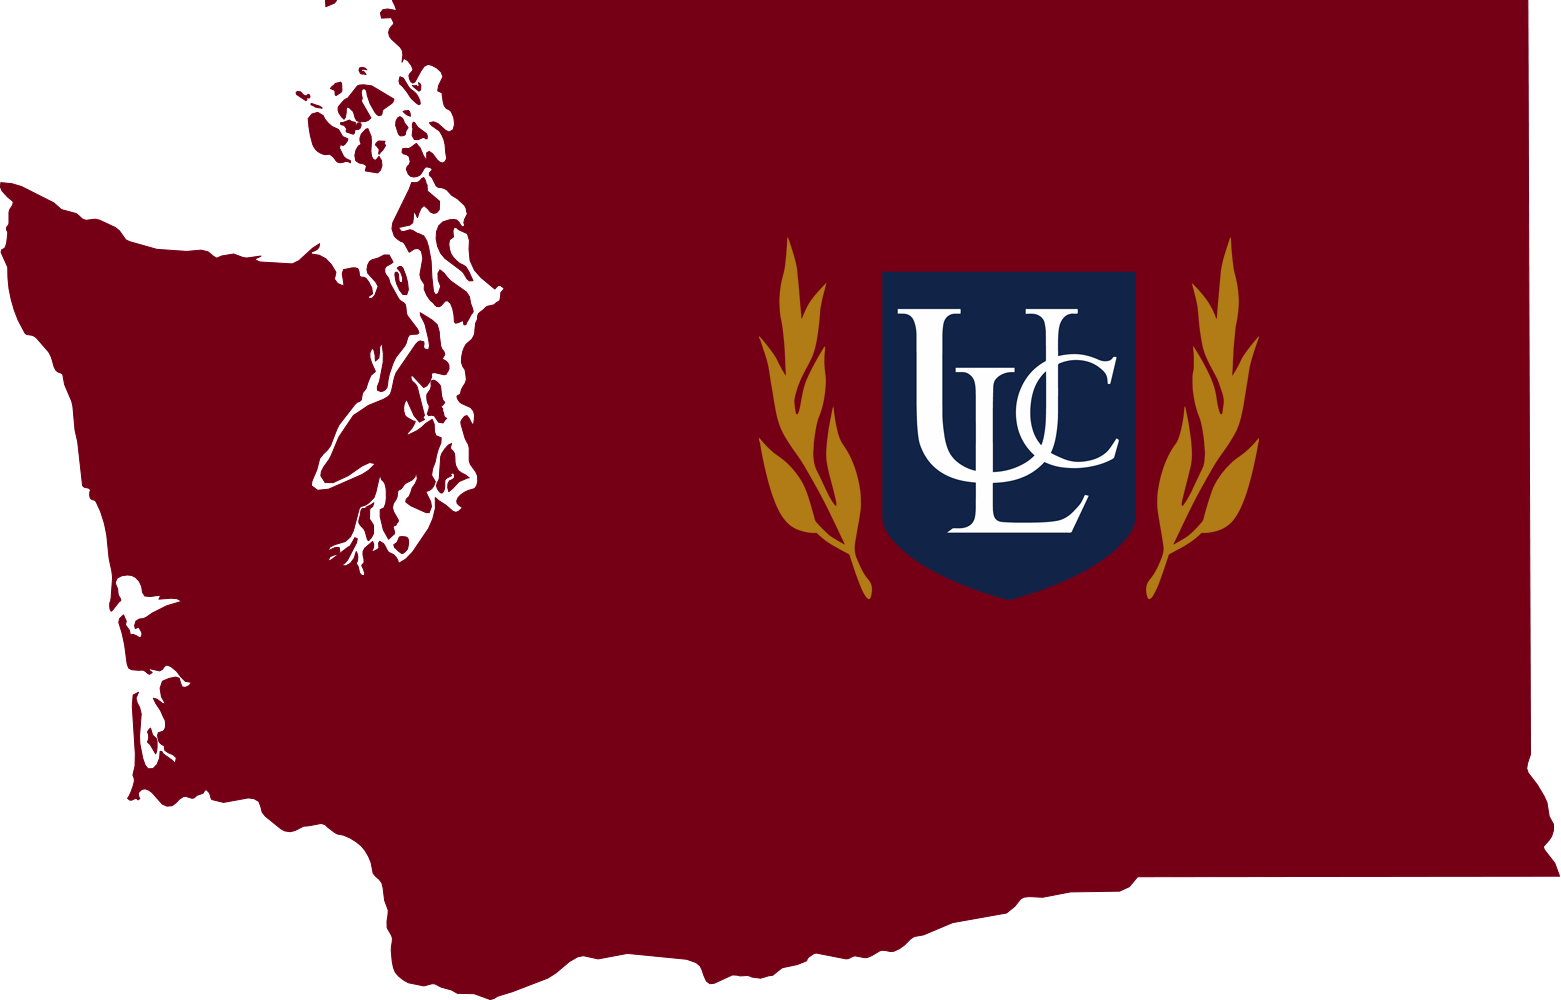 An outline of Washington with the ULC logo